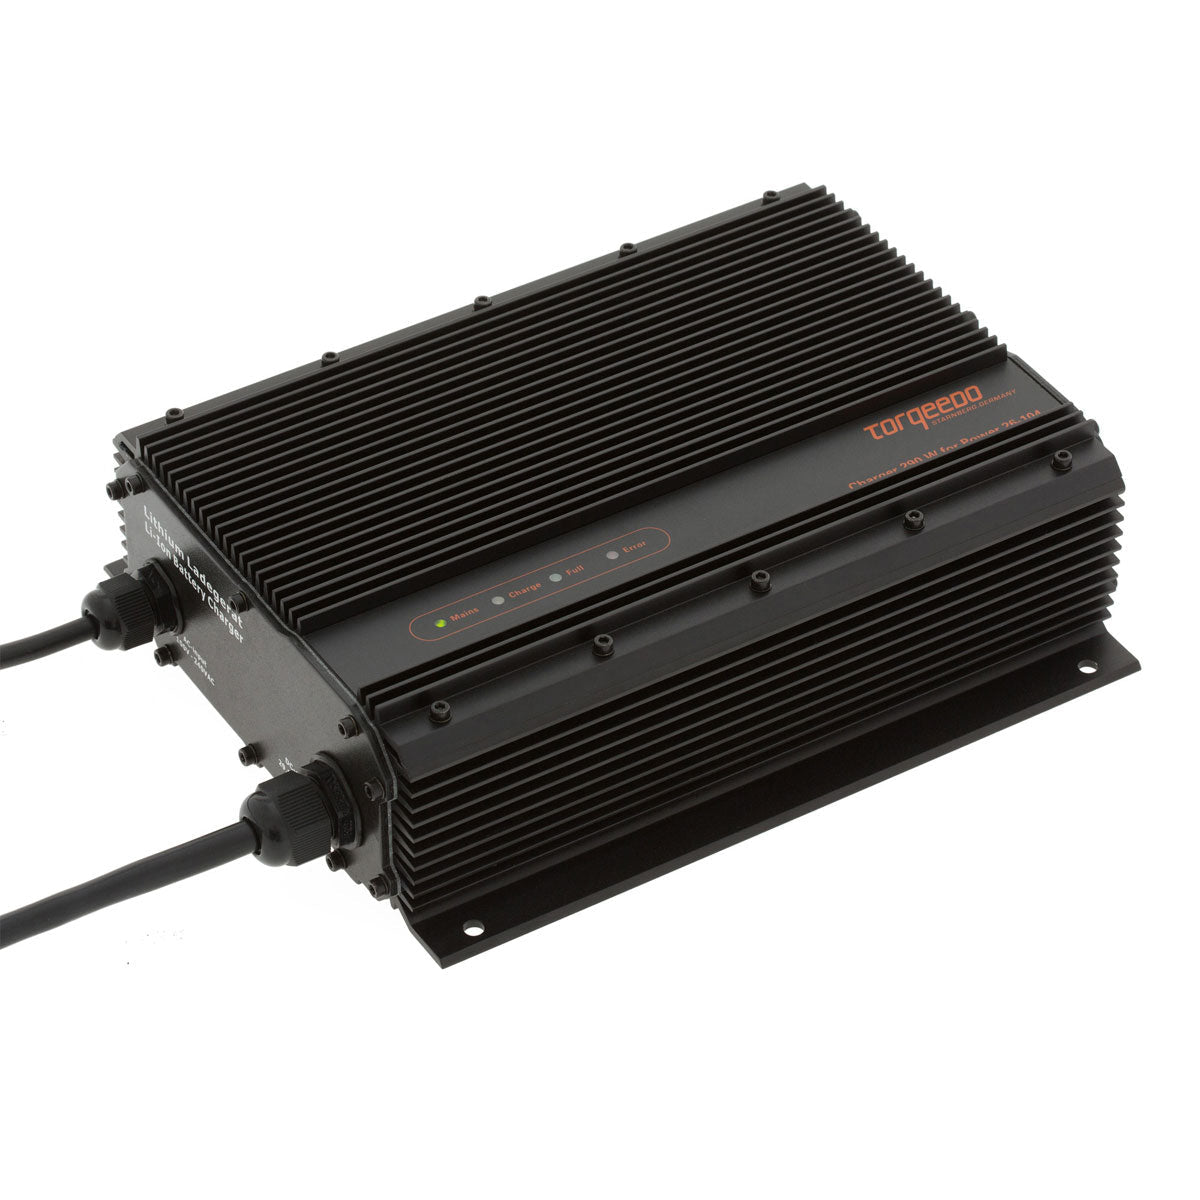 Charger 350 W for Power 24-3500